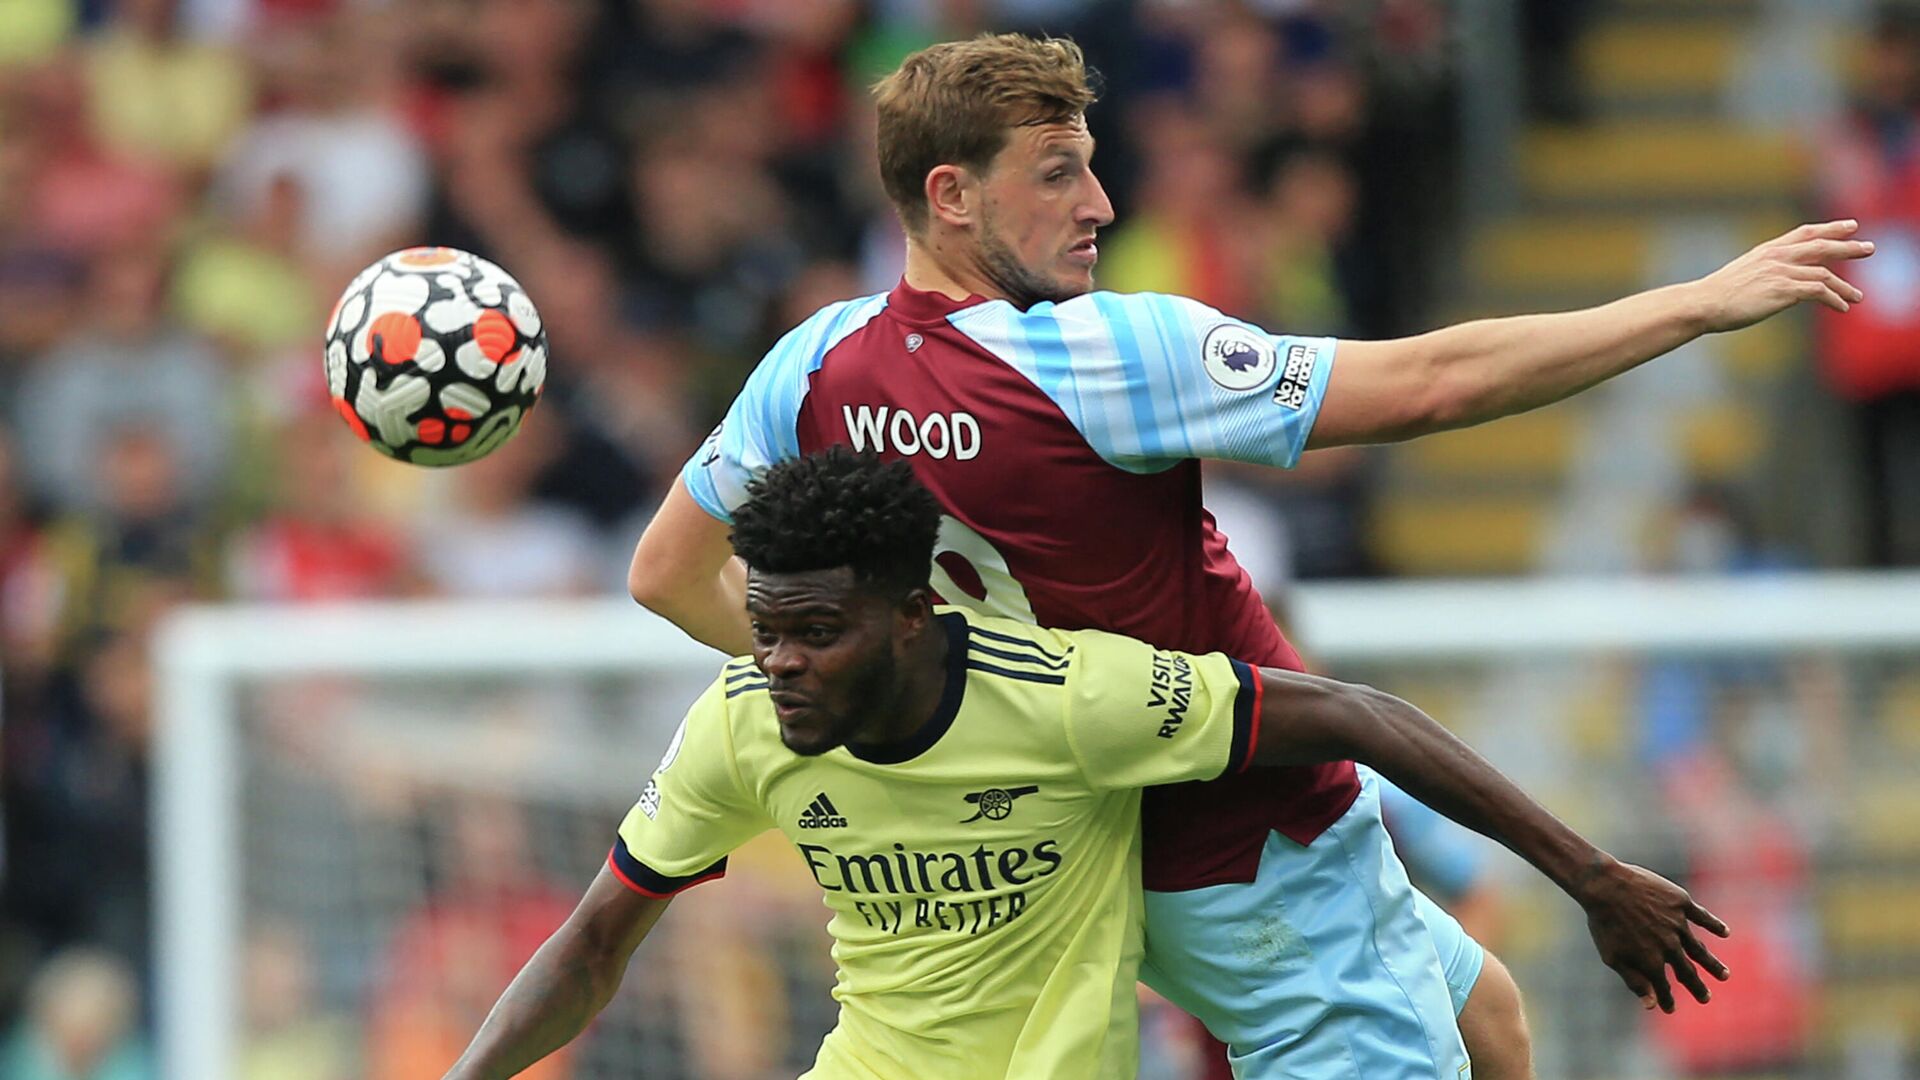 Arsenal's Ghanaian midfielder Thomas Partey (L) vies with Burnley's New Zealand striker Chris Wood (R) during the English Premier League football match between Burnley and Arsenal at Turf Moor in Burnley, north west England on September 18, 2021. (Photo by Lindsey Parnaby / AFP) / RESTRICTED TO EDITORIAL USE. No use with unauthorized audio, video, data, fixture lists, club/league logos or 'live' services. Online in-match use limited to 120 images. An additional 40 images may be used in extra time. No video emulation. Social media in-match use limited to 120 images. An additional 40 images may be used in extra time. No use in betting publications, games or single club/league/player publications. /  - РИА Новости, 1920, 06.01.2022